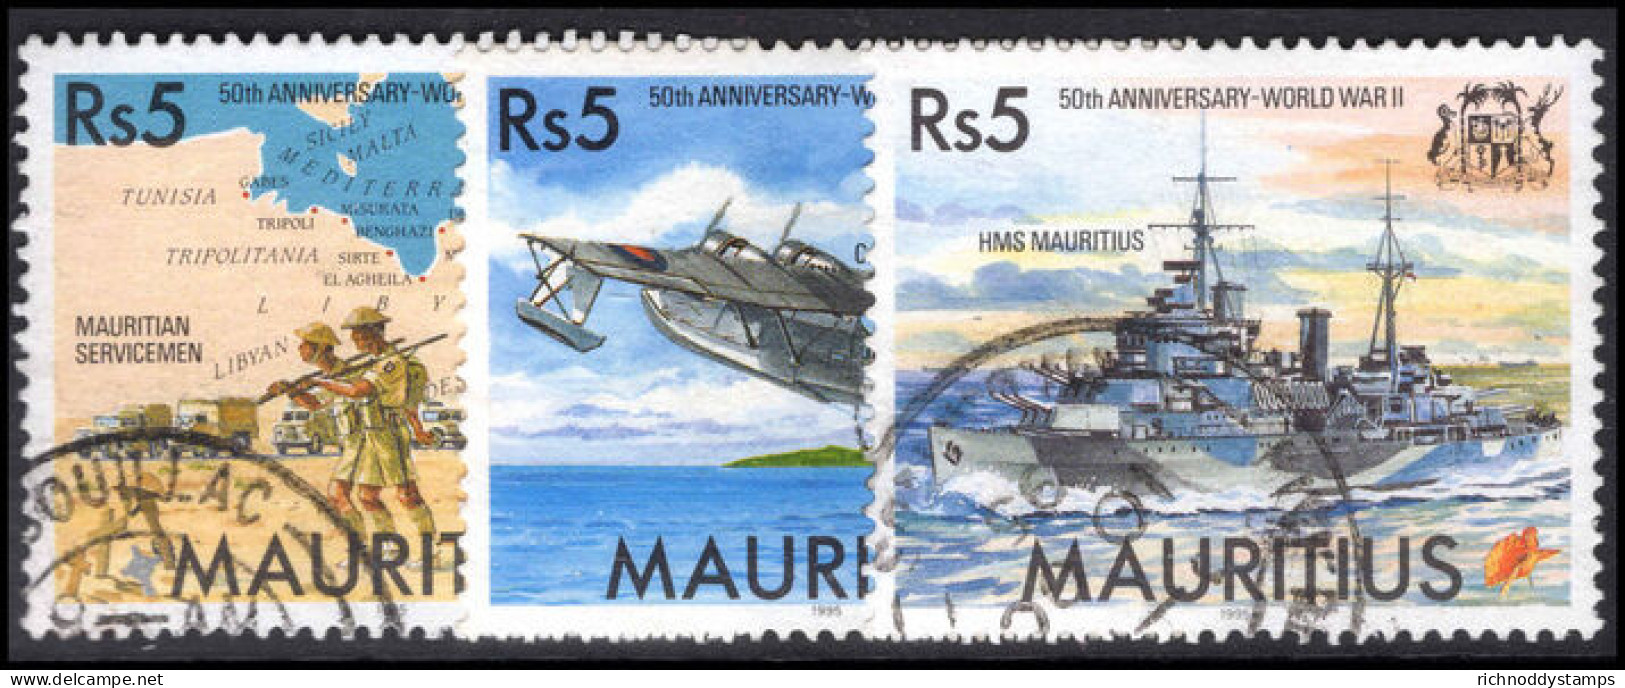 Mauritius 1995 50th Anniv Of The End Of WWII Fine Used. - Mauritius (1968-...)